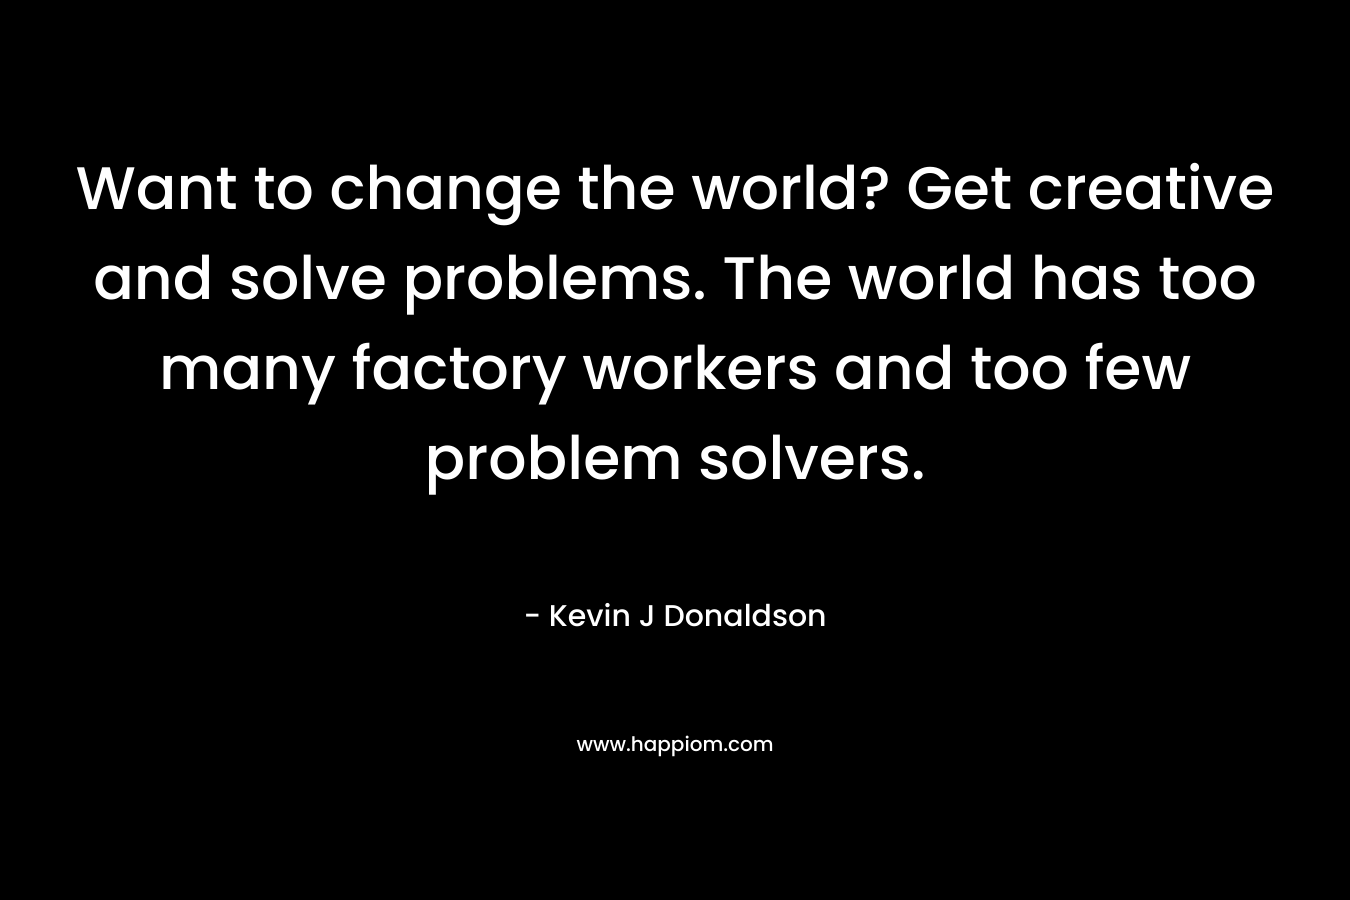 Want to change the world? Get creative and solve problems. The world has too many factory workers and too few problem solvers.